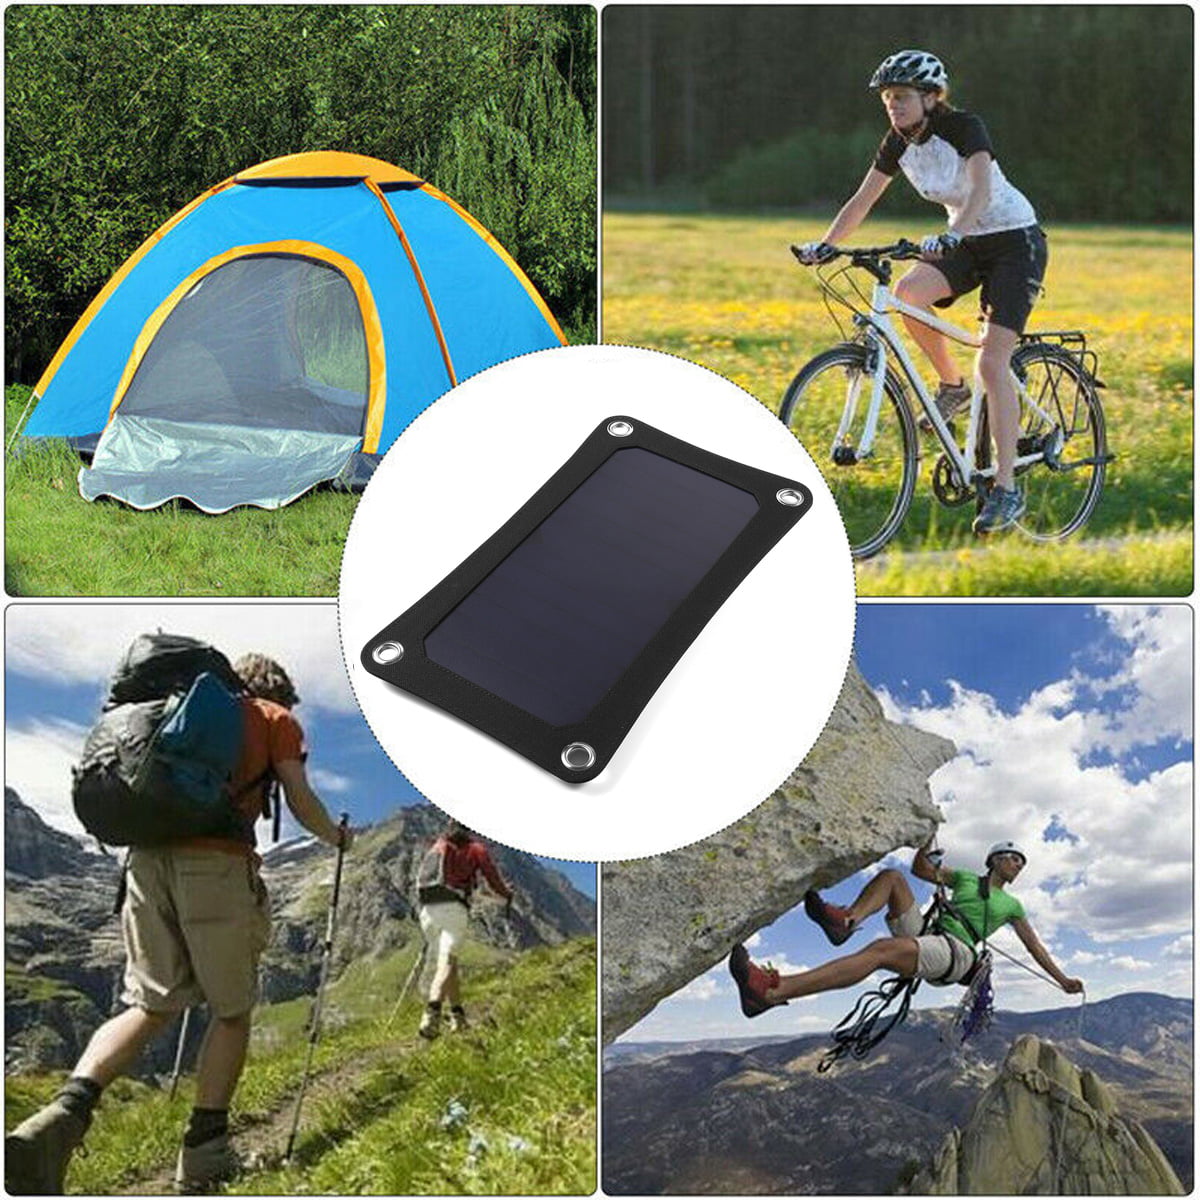 Details about   32W 5V Portable Solar Panel Phone Charger Power Bank USB Port Outdoor Camping